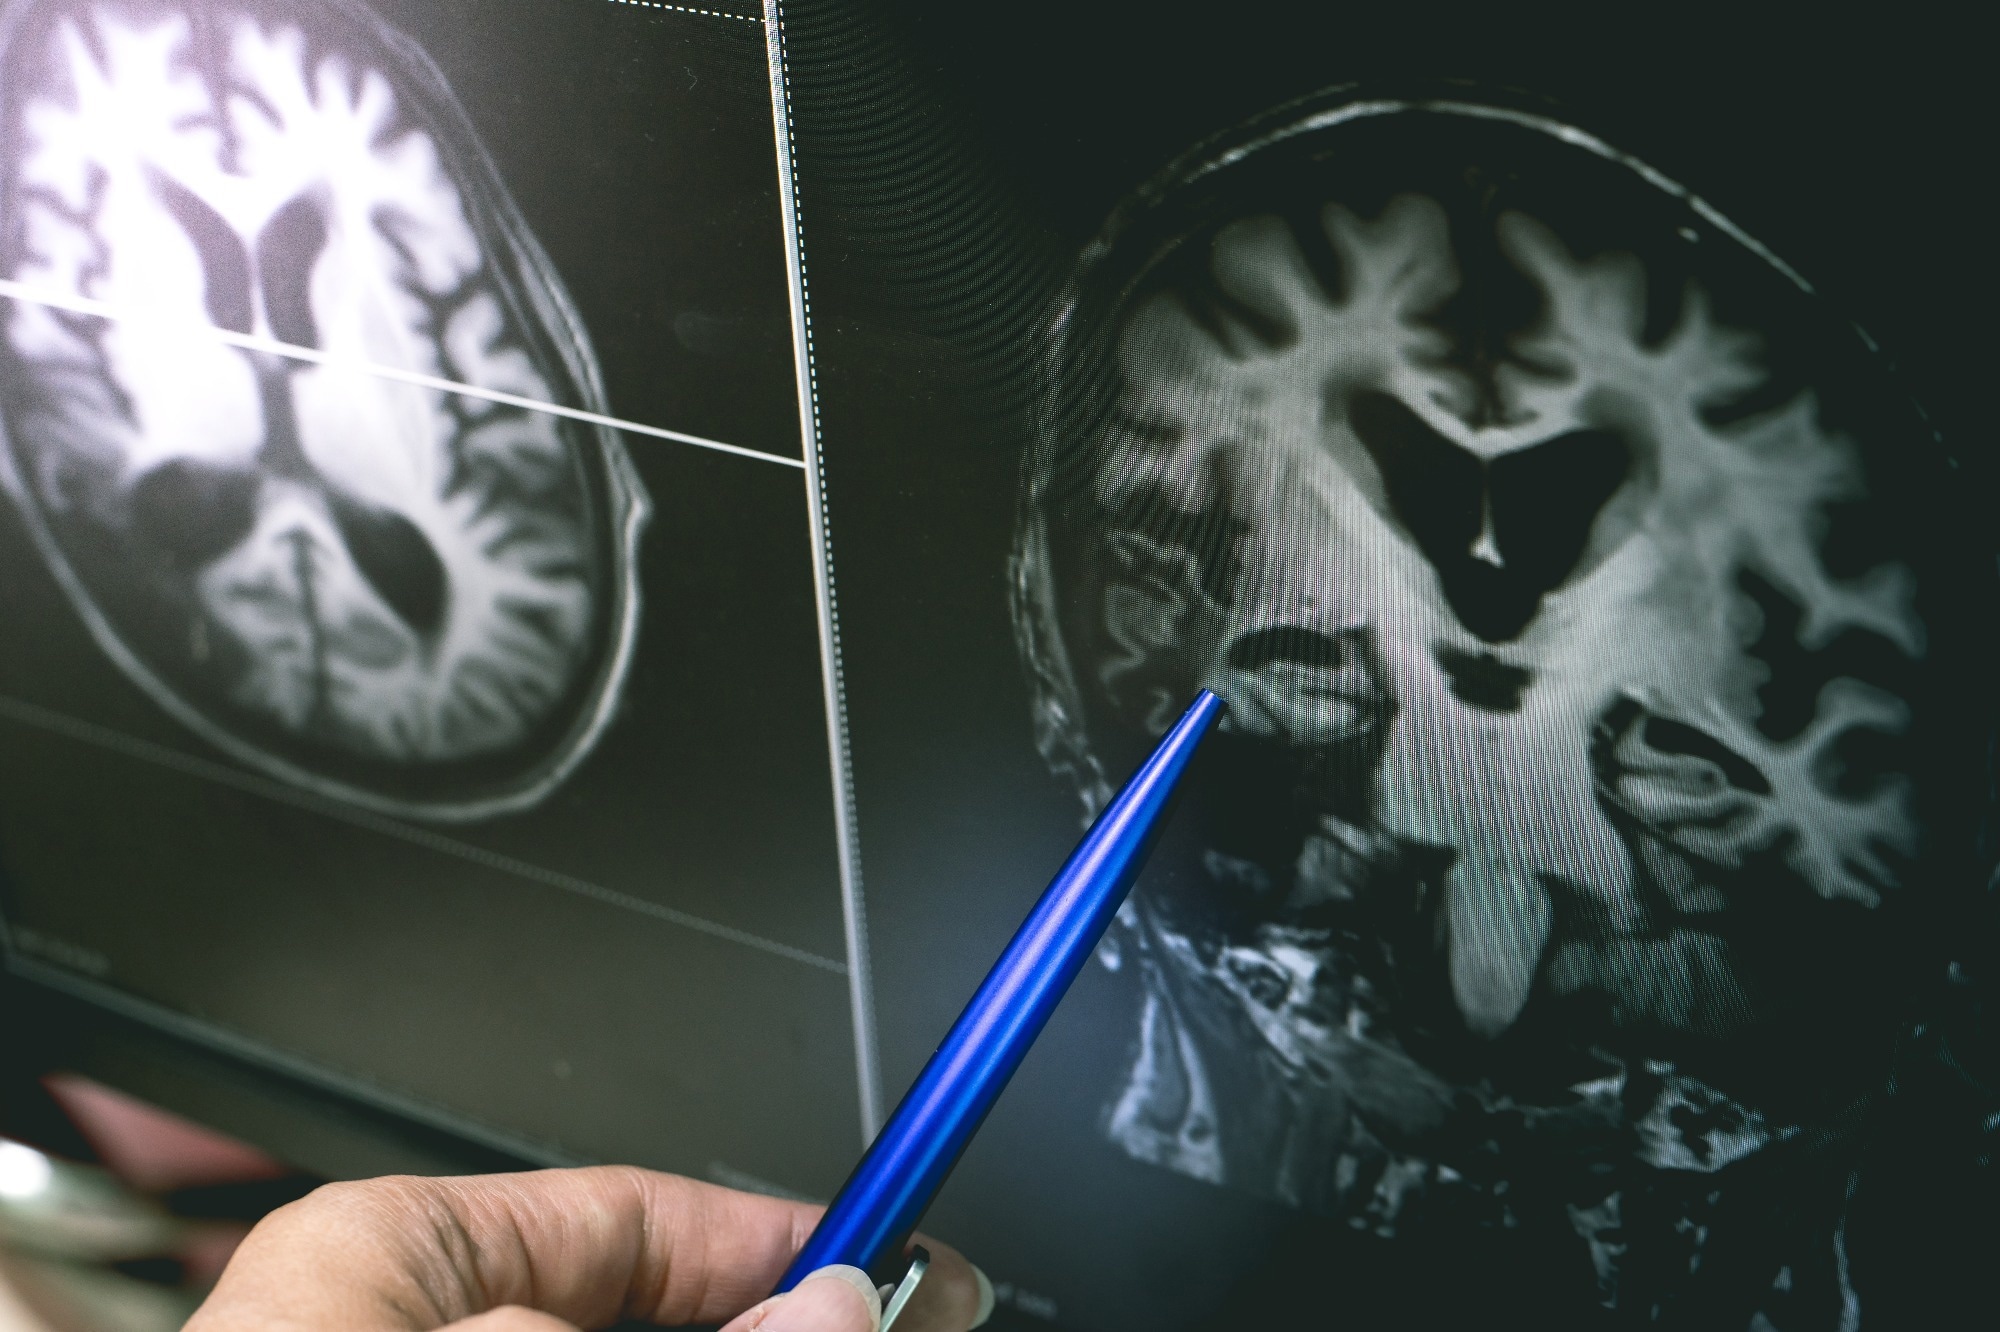 Study: Association between use of systemic and inhaled glucocorticoids and changes in brain volume and white matter microstructure: a cross-sectional study using data from the UK Biobank. Image Credit: Atthapon Raksthaput / Shutterstock